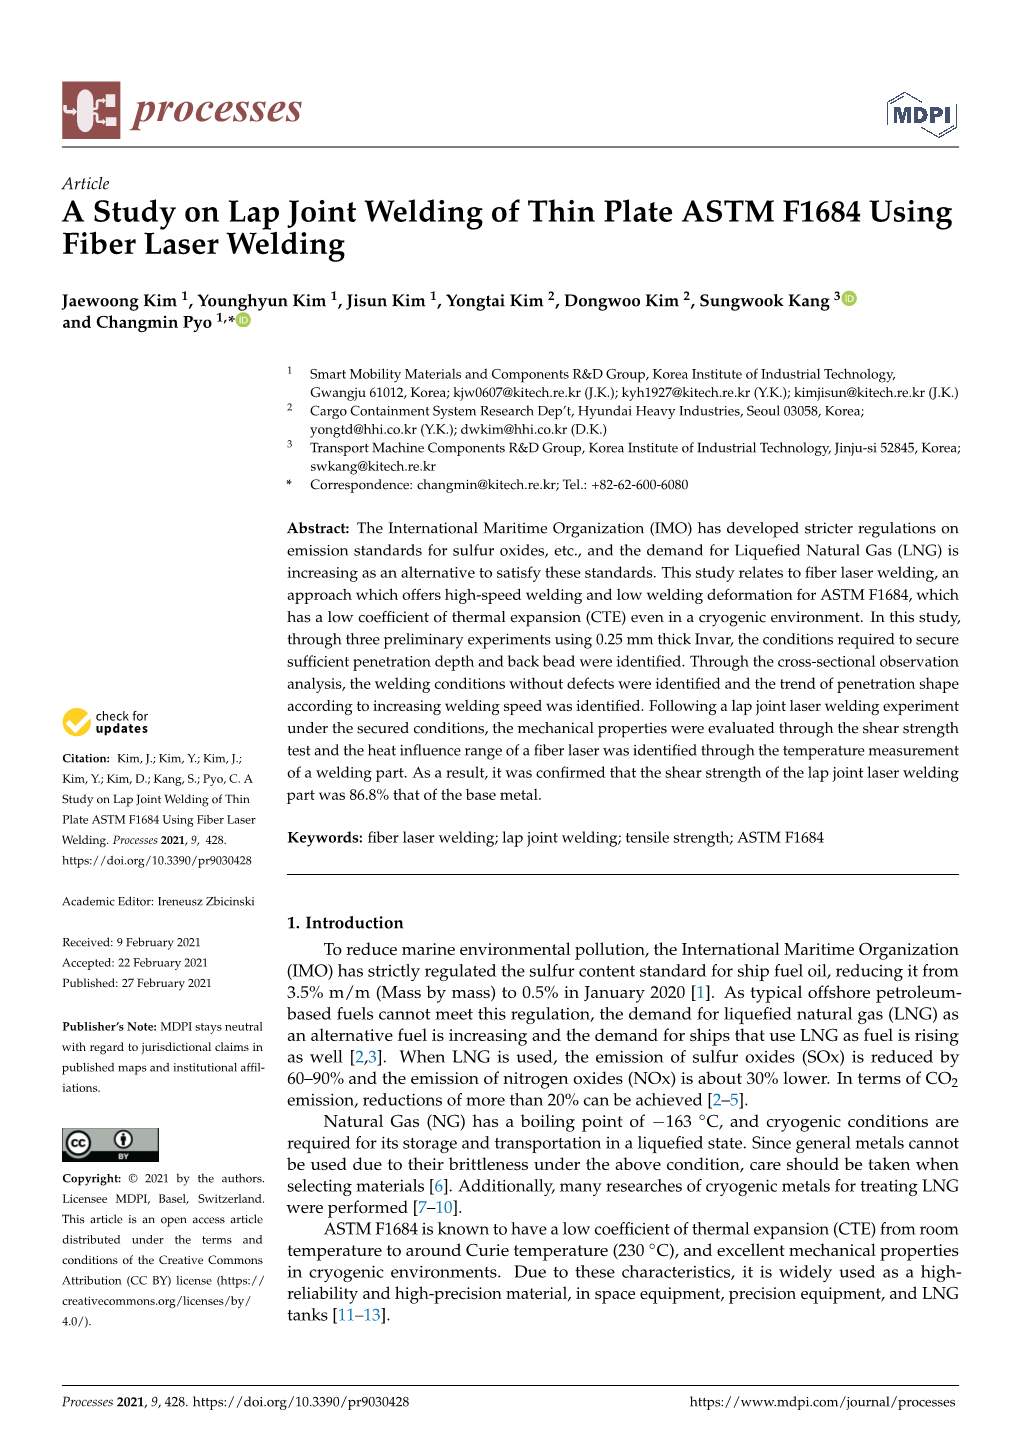 A Study on Lap Joint Welding of Thin Plate ASTM F1684 Using Fiber Laser Welding